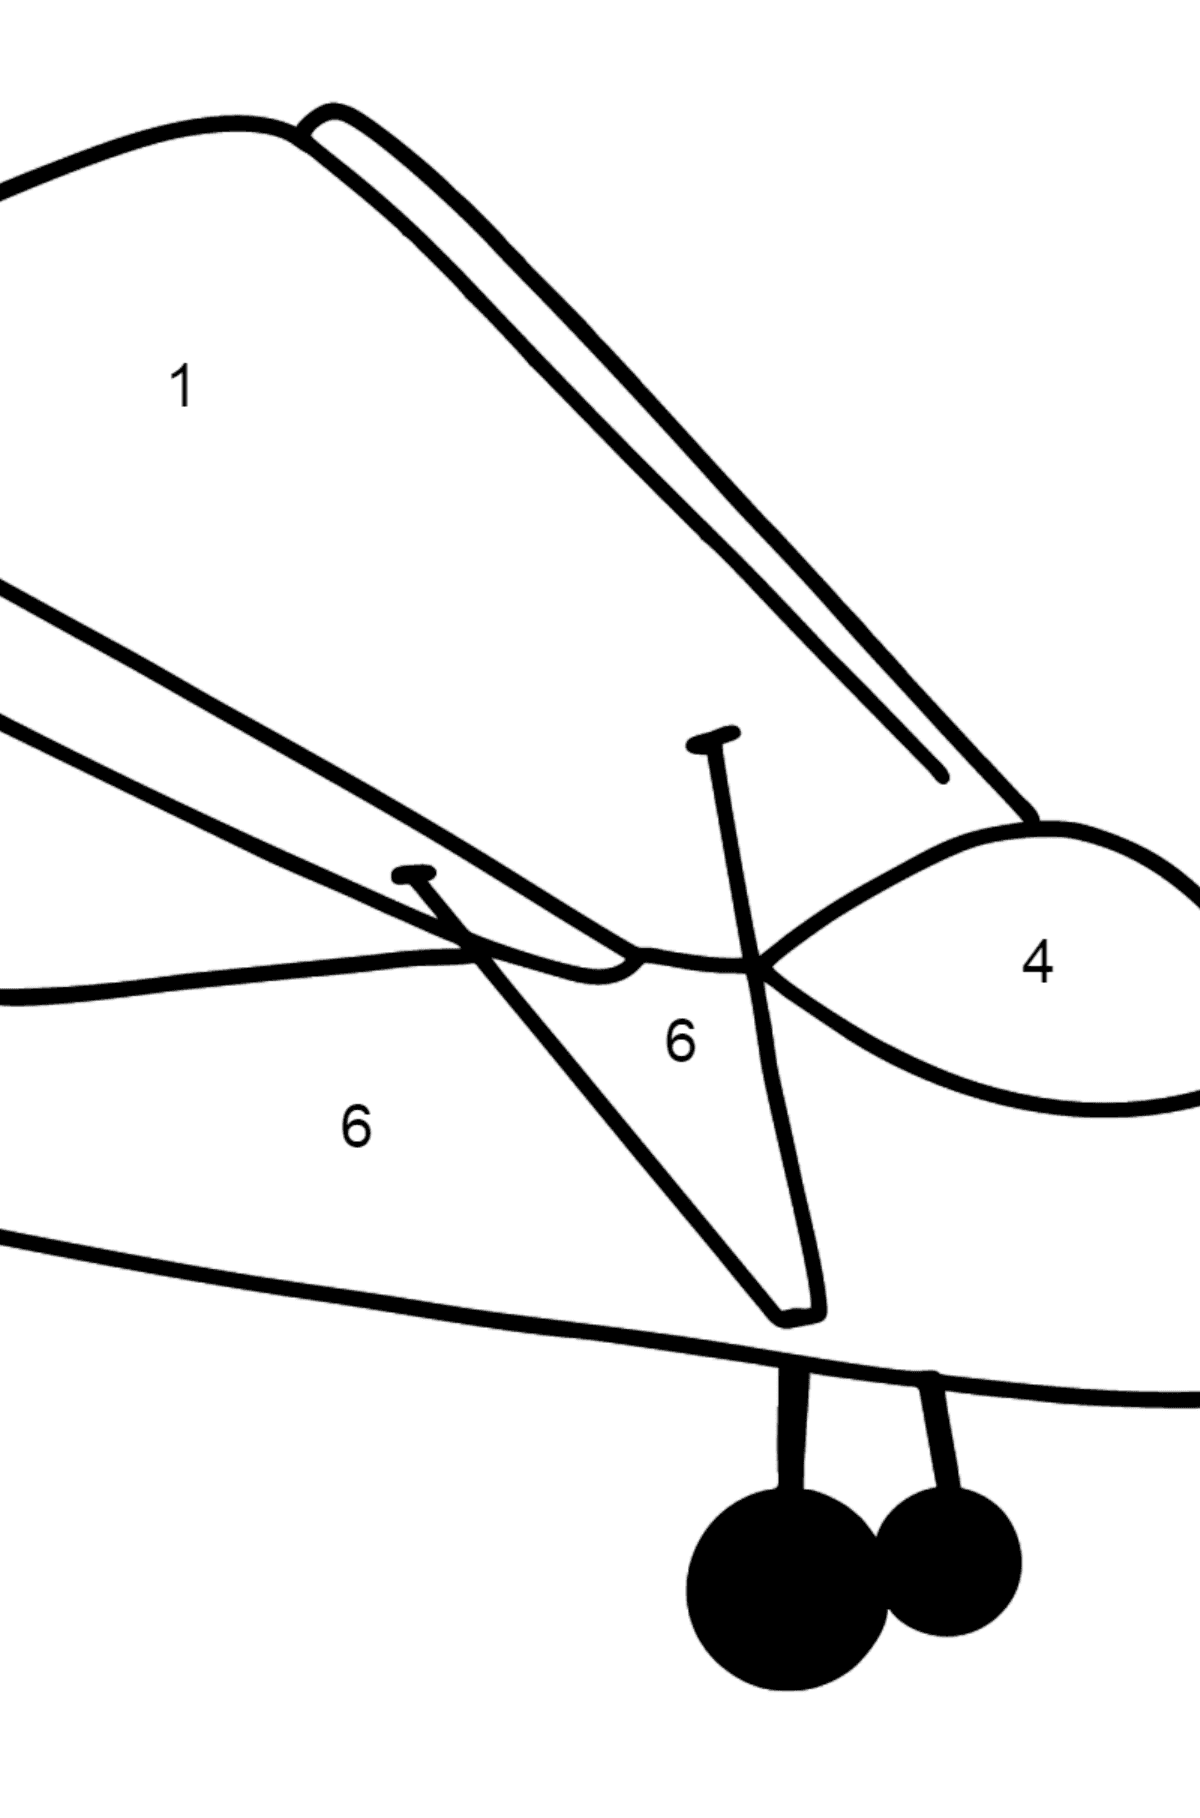 Small Plane coloring page - Coloring by Numbers for Kids